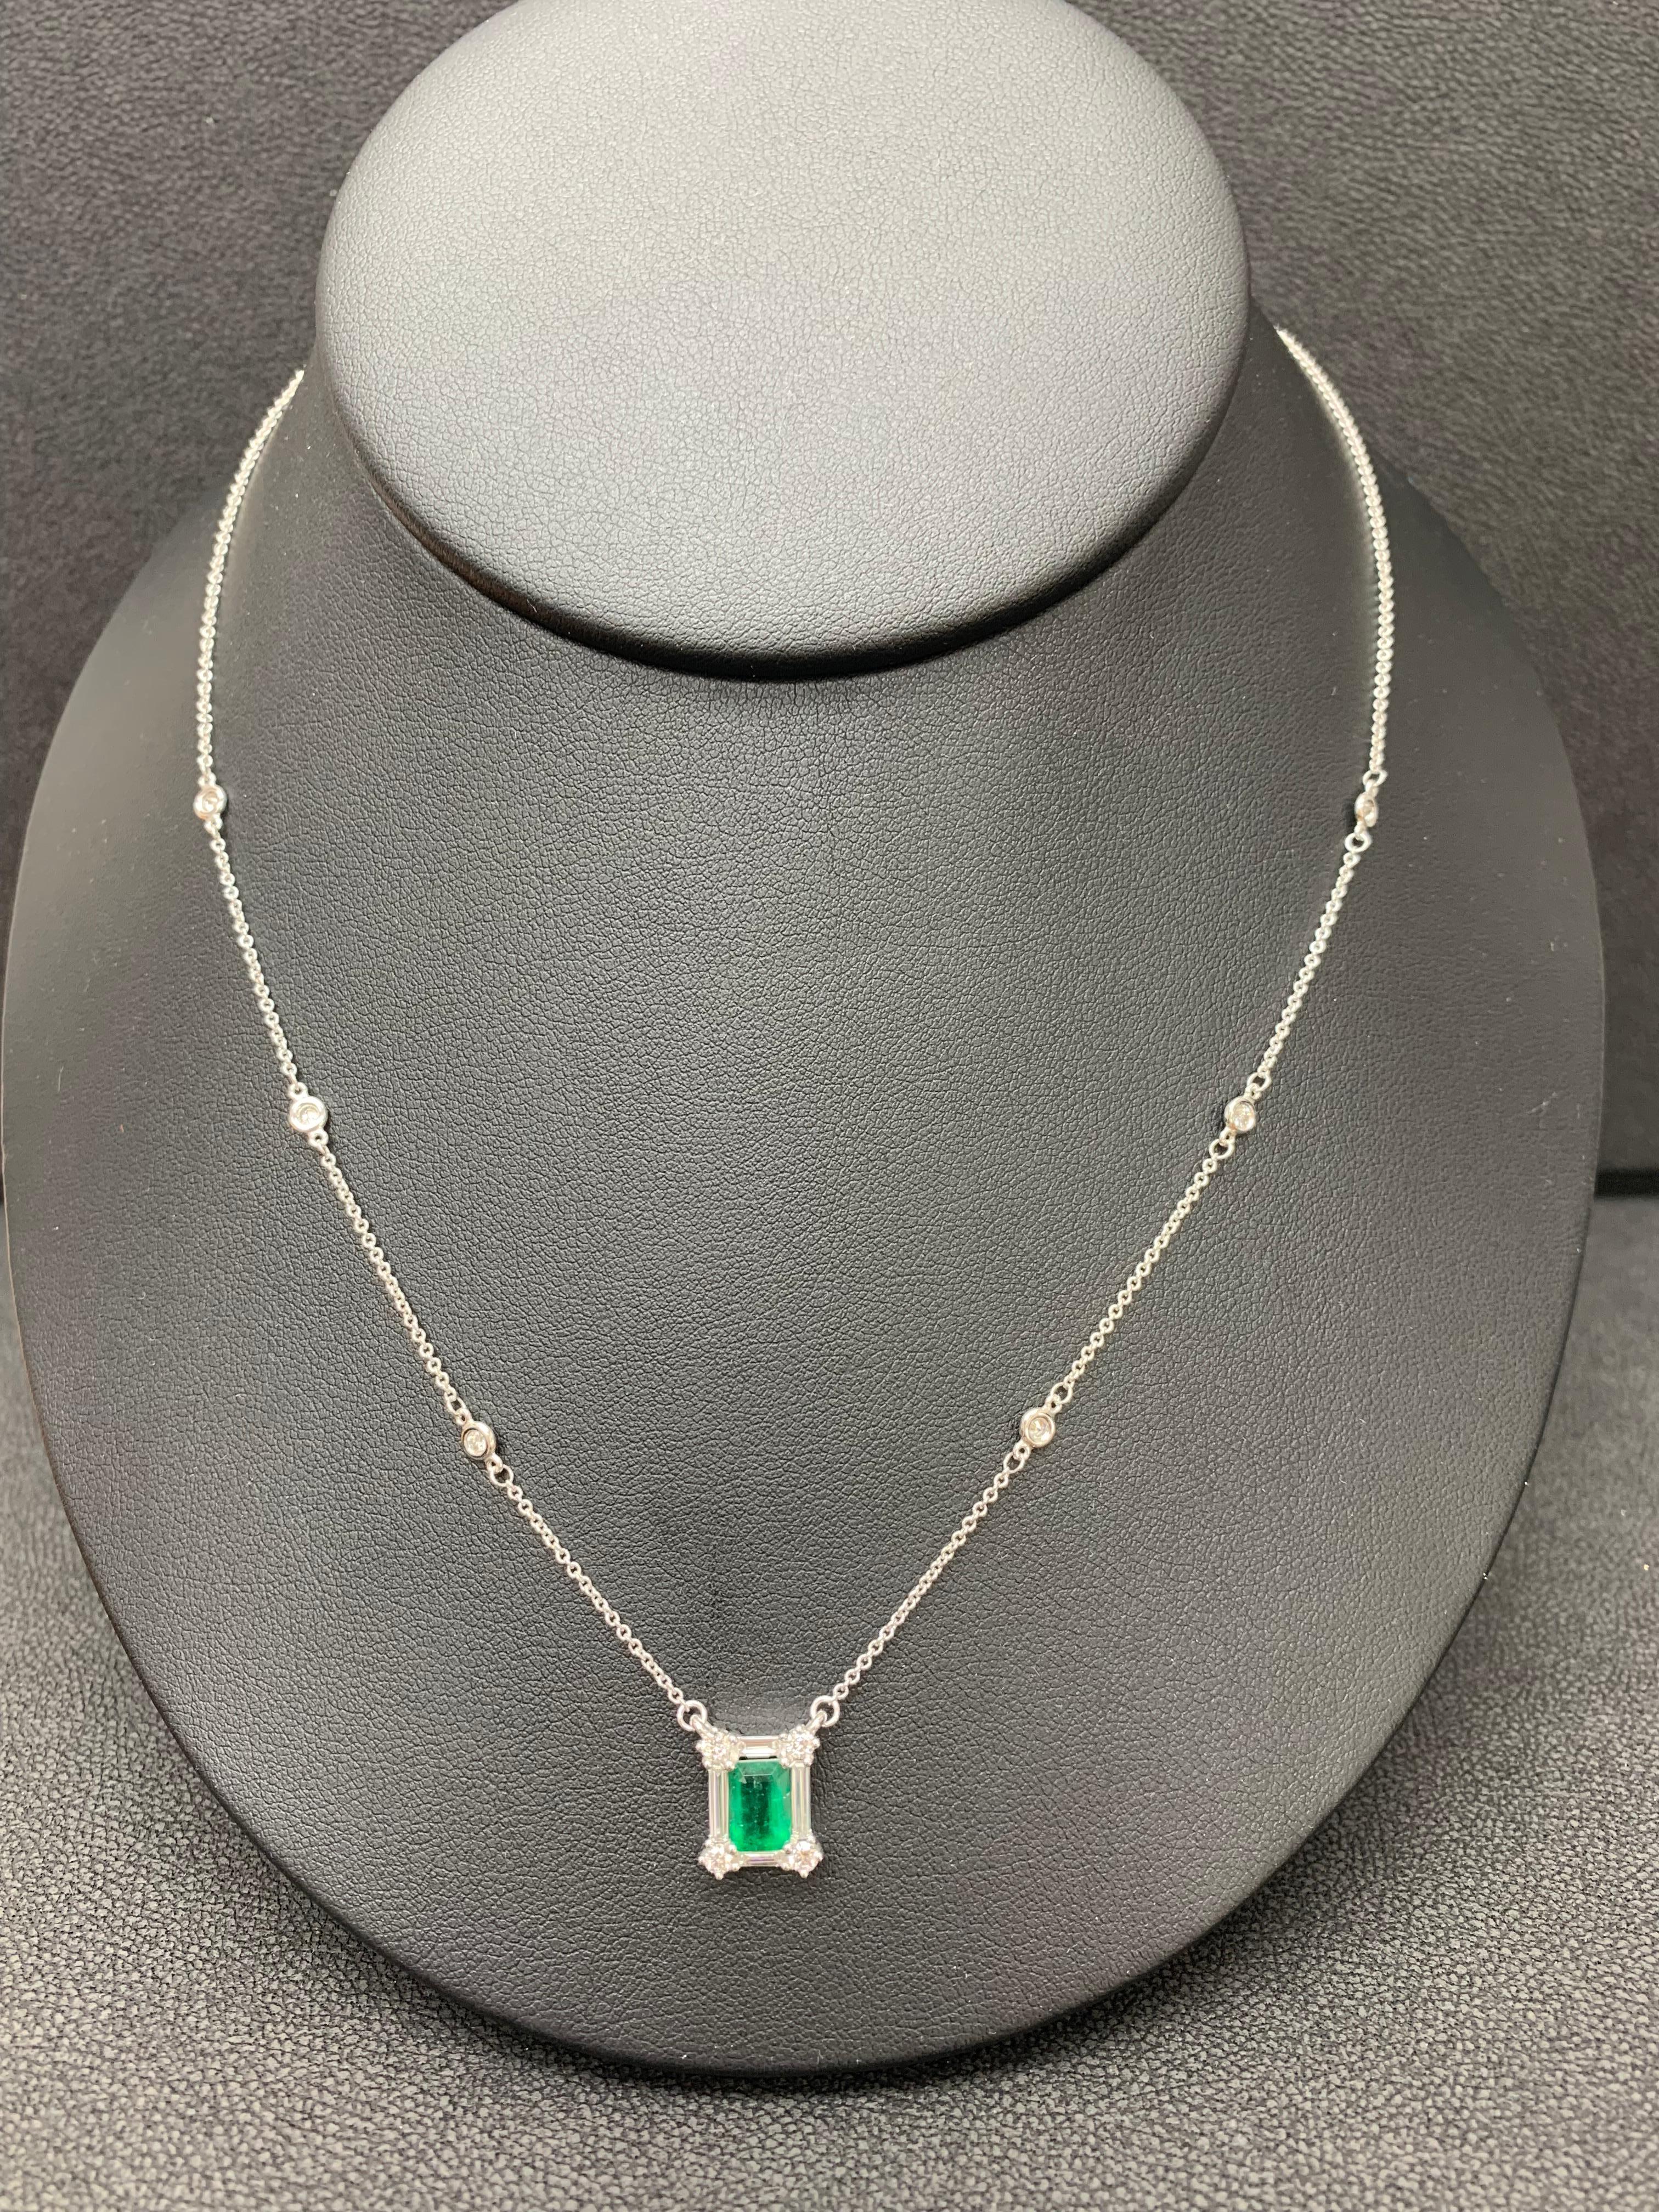 A fashionable pendant necklace showcasing a 0.90 carat emerald cut lush green emerald. The center stone is surrounded by a row of brilliant-cut round and baguette diamonds weighing 0.63 carats total. Made in 14k white gold. Comes with a gold chain